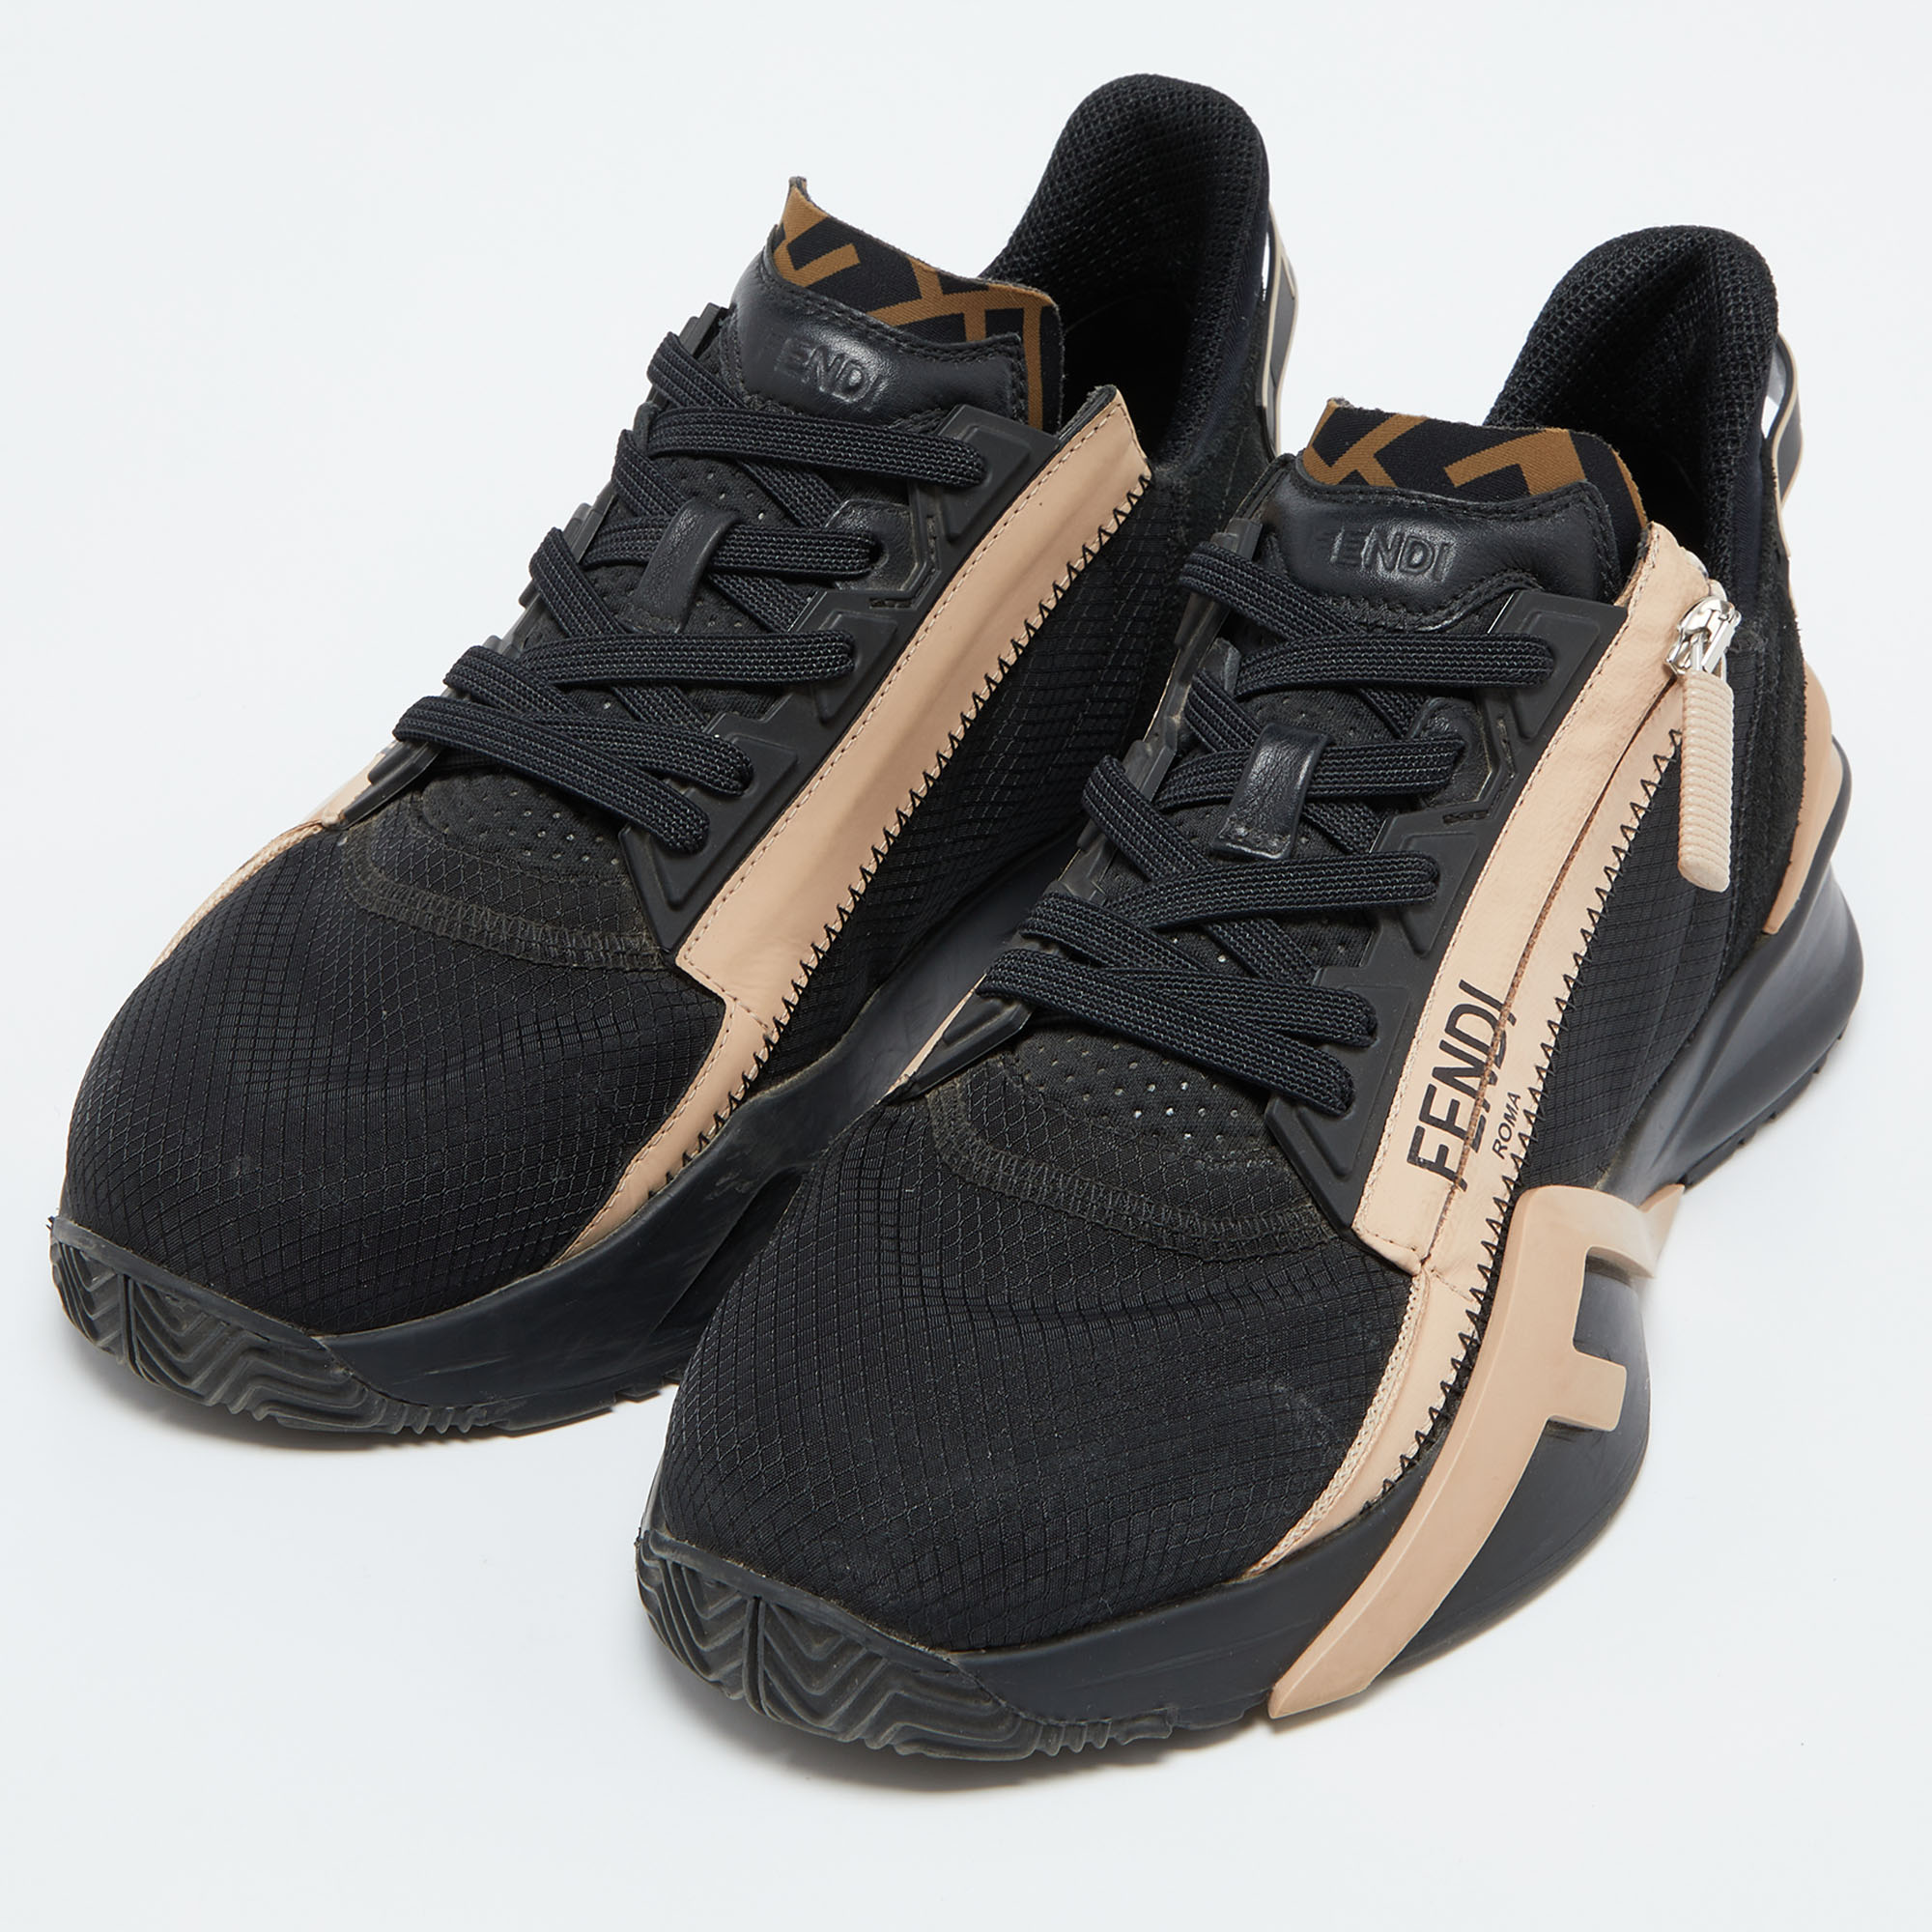 

Fendi Black/Peach Suede and Nylon Flow Sneakers Size